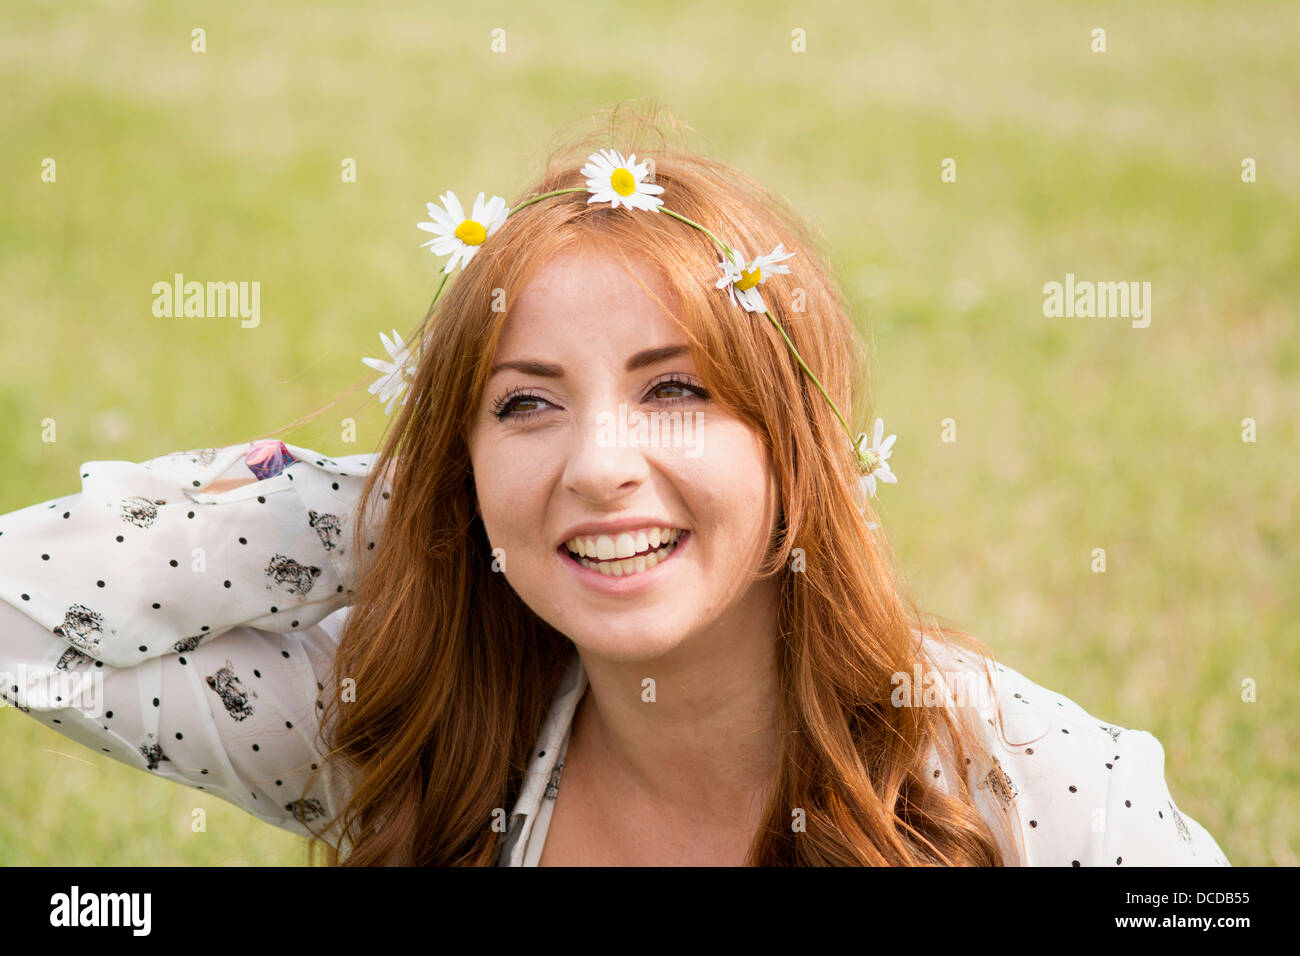 A horizontal, colour image of a happy, young, smiling woman with long red hair, with a daisy chain in her hair Stock Photo